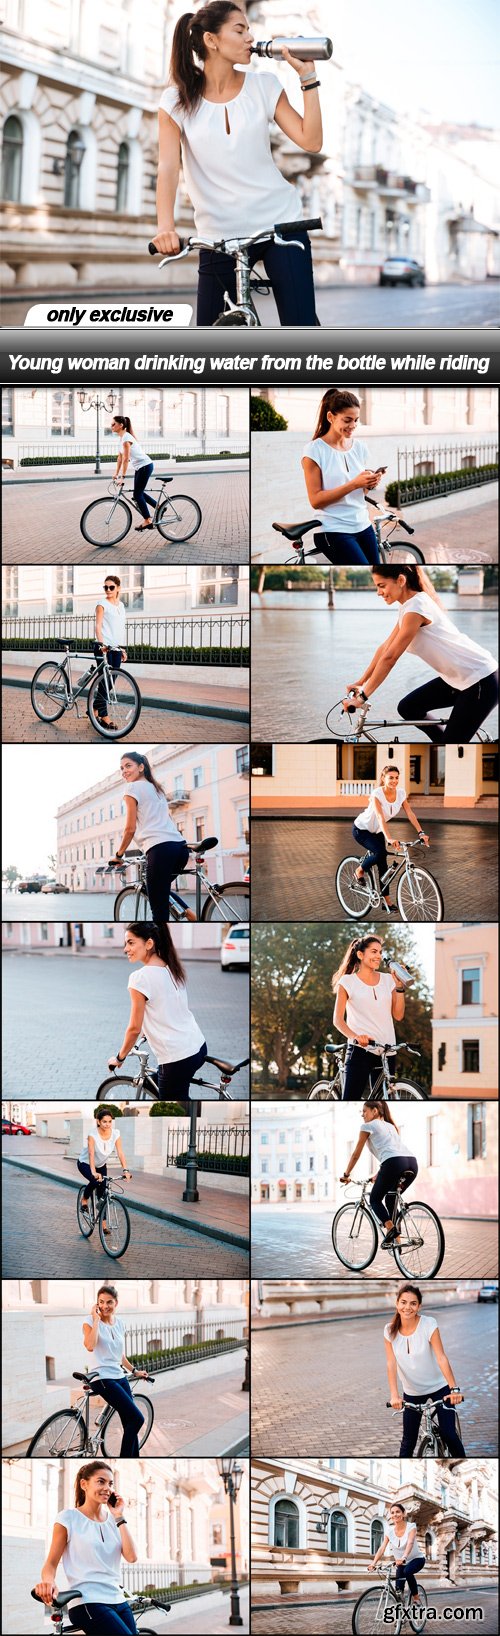 Young woman drinking water from the bottle while riding - 15 UHQ JPEG